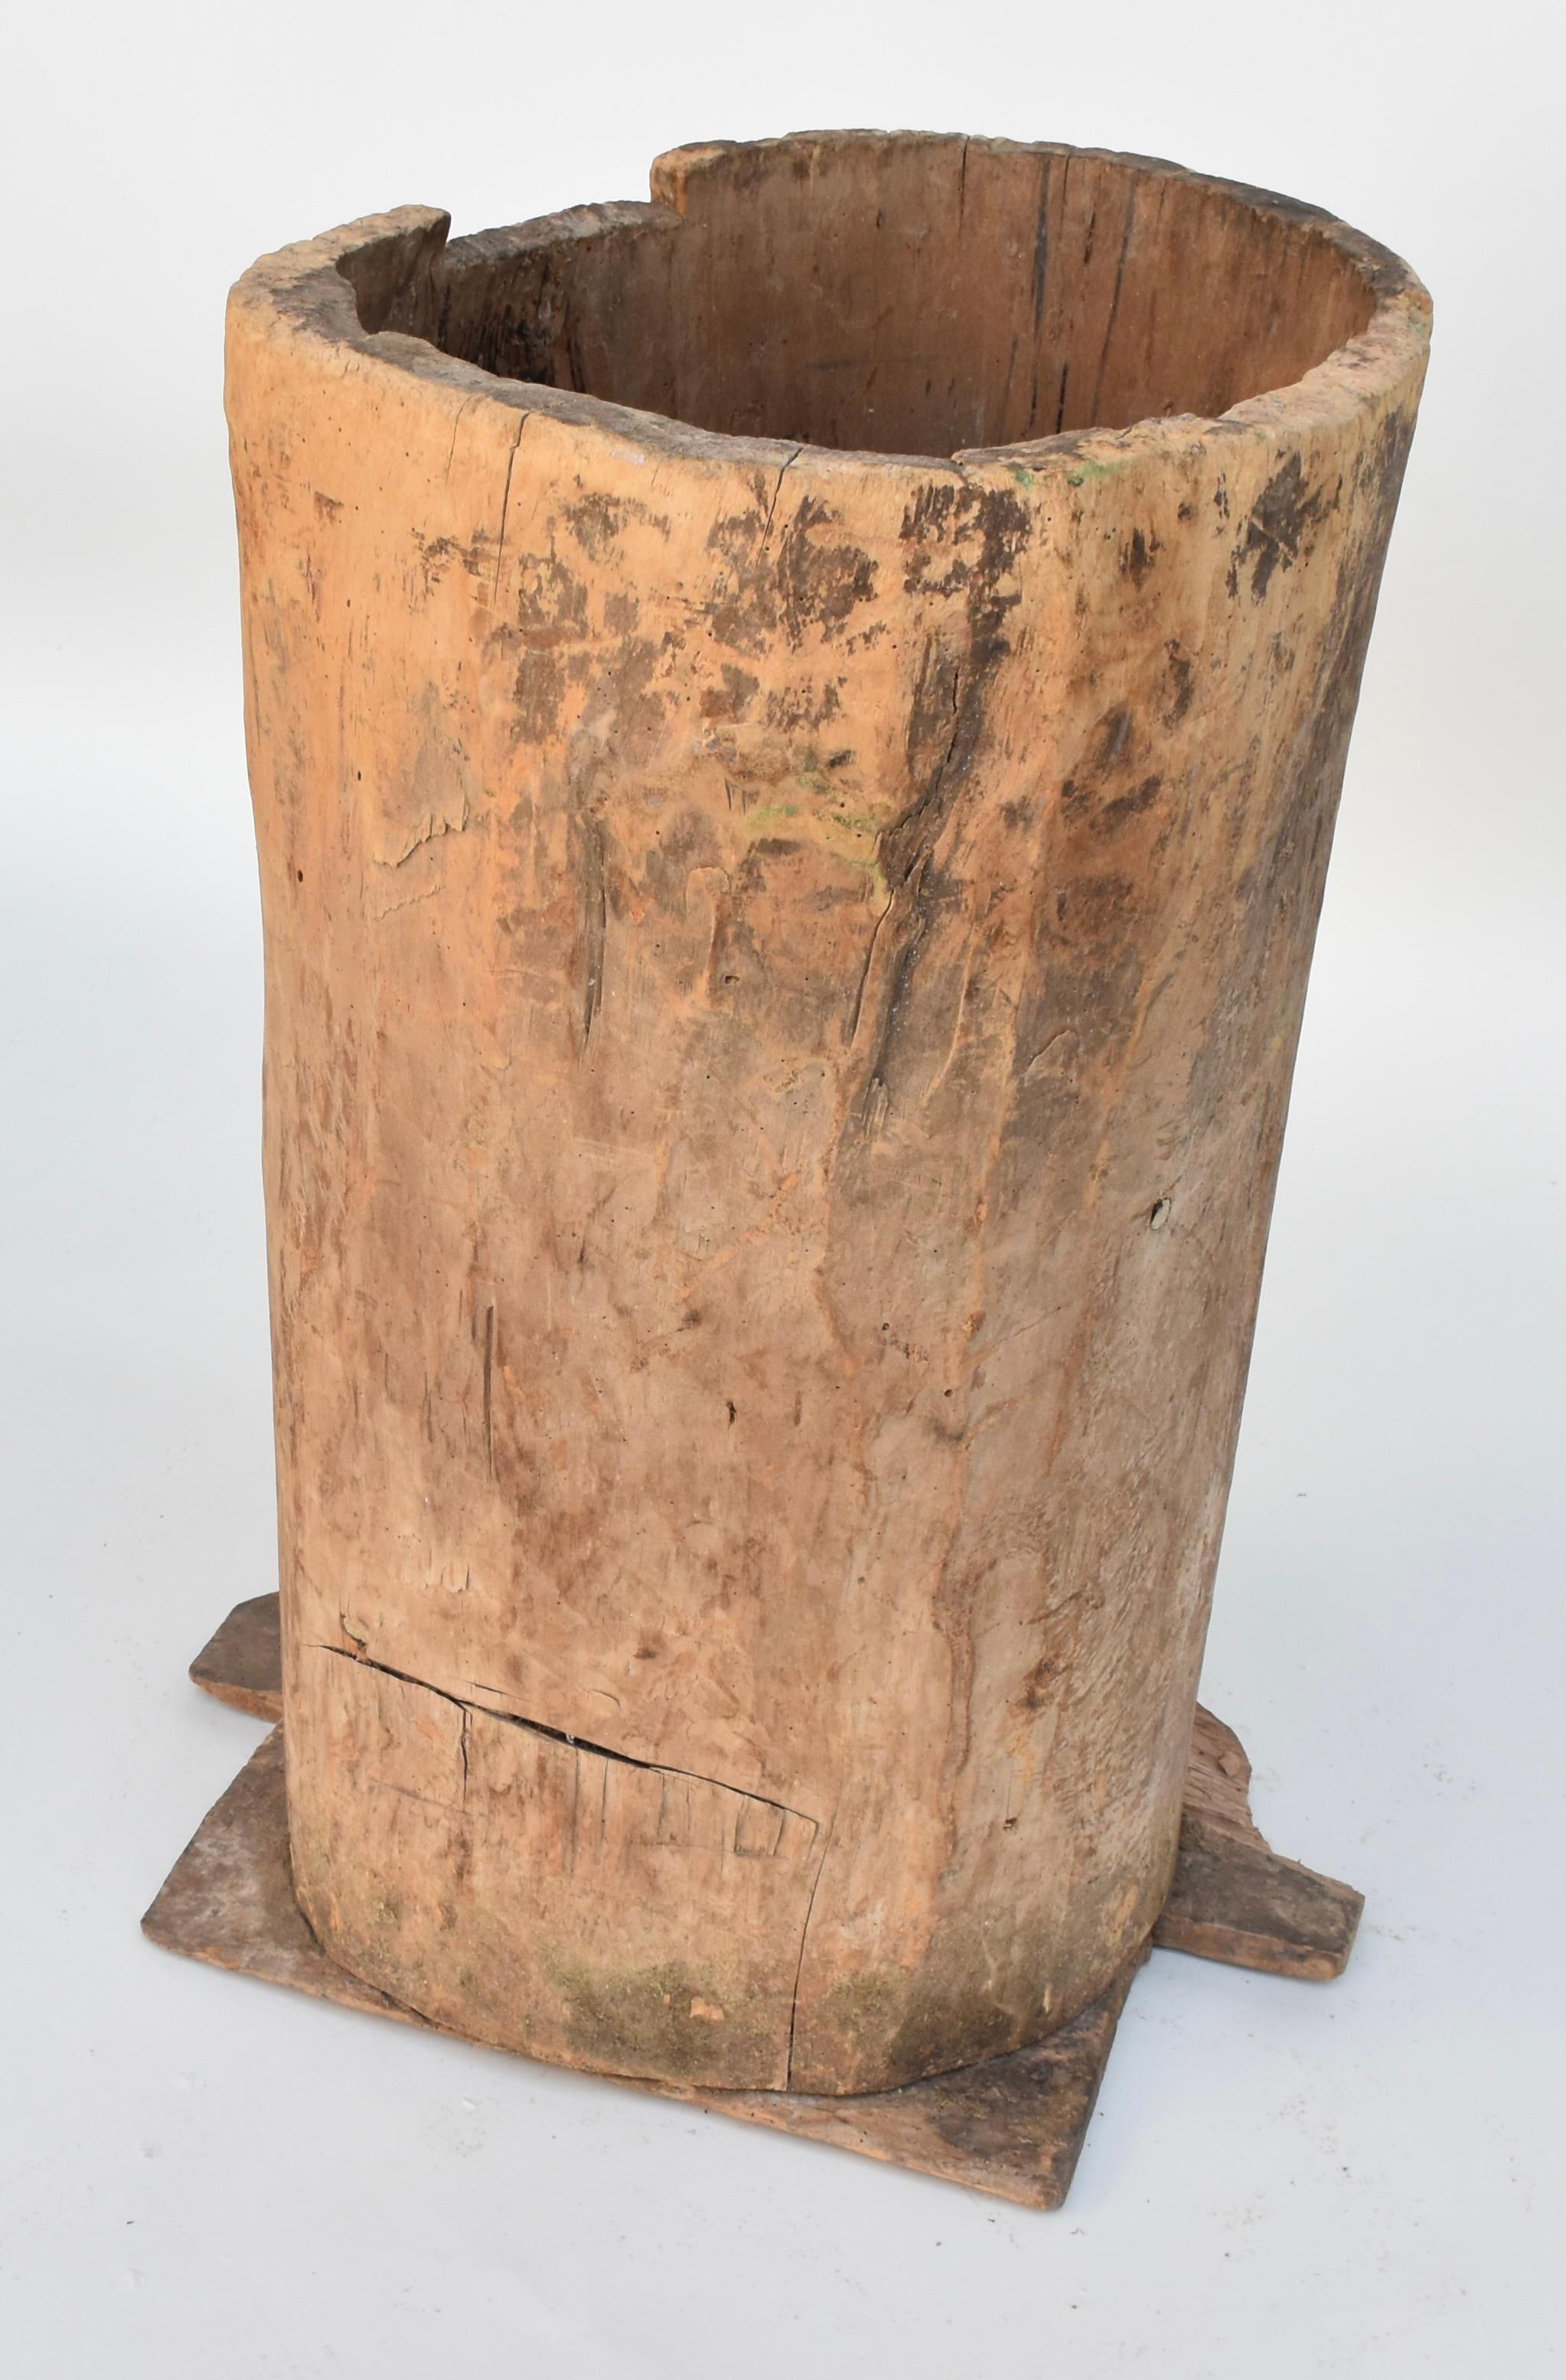 French Antique Hollowed Tree Trunk Wooden Planter Vessel, Late 19th C. France In Good Condition For Sale In Bonita Springs, FL